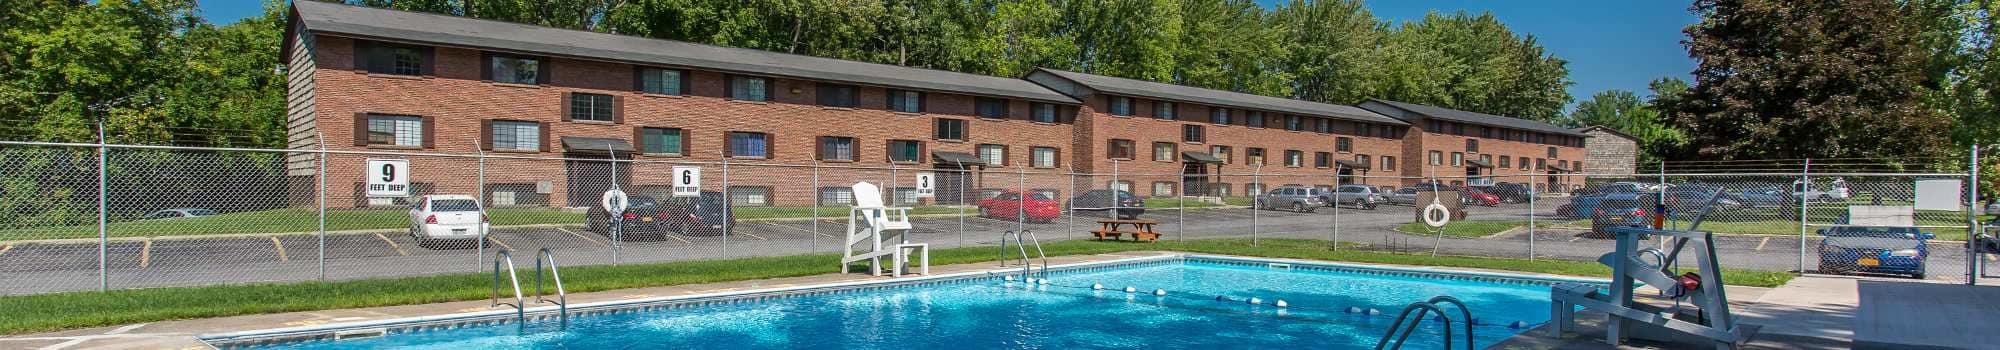 Reviews at The Residences at Covered Bridge in Liverpool, New York